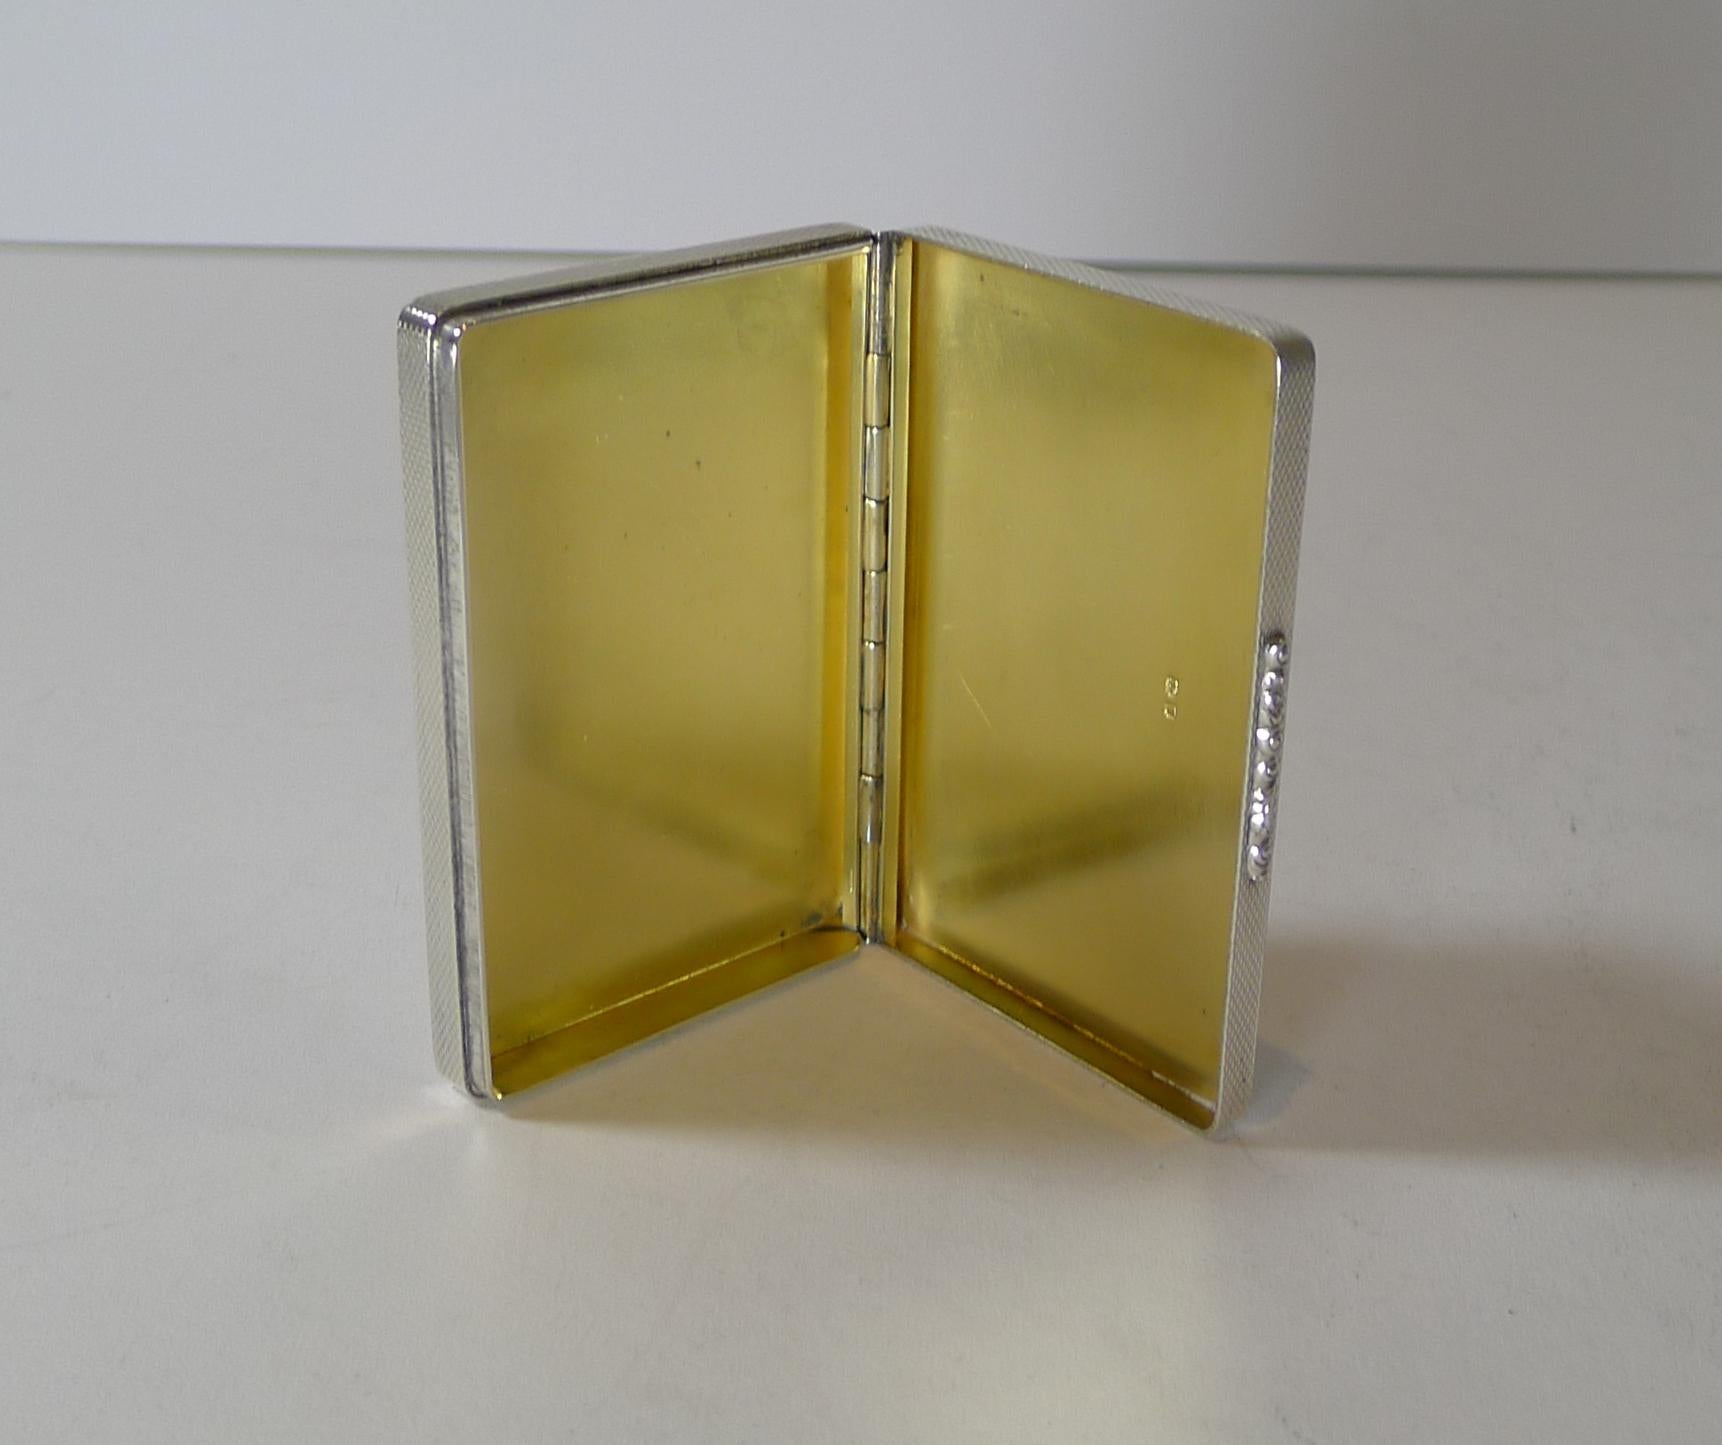 A top quality late Art Deco box made from solid English sterling silver, a large pill box / snuff box, or would make a great business card case (a custom smaller sized card would have to be made which these days is easy).

This heavy box weighing